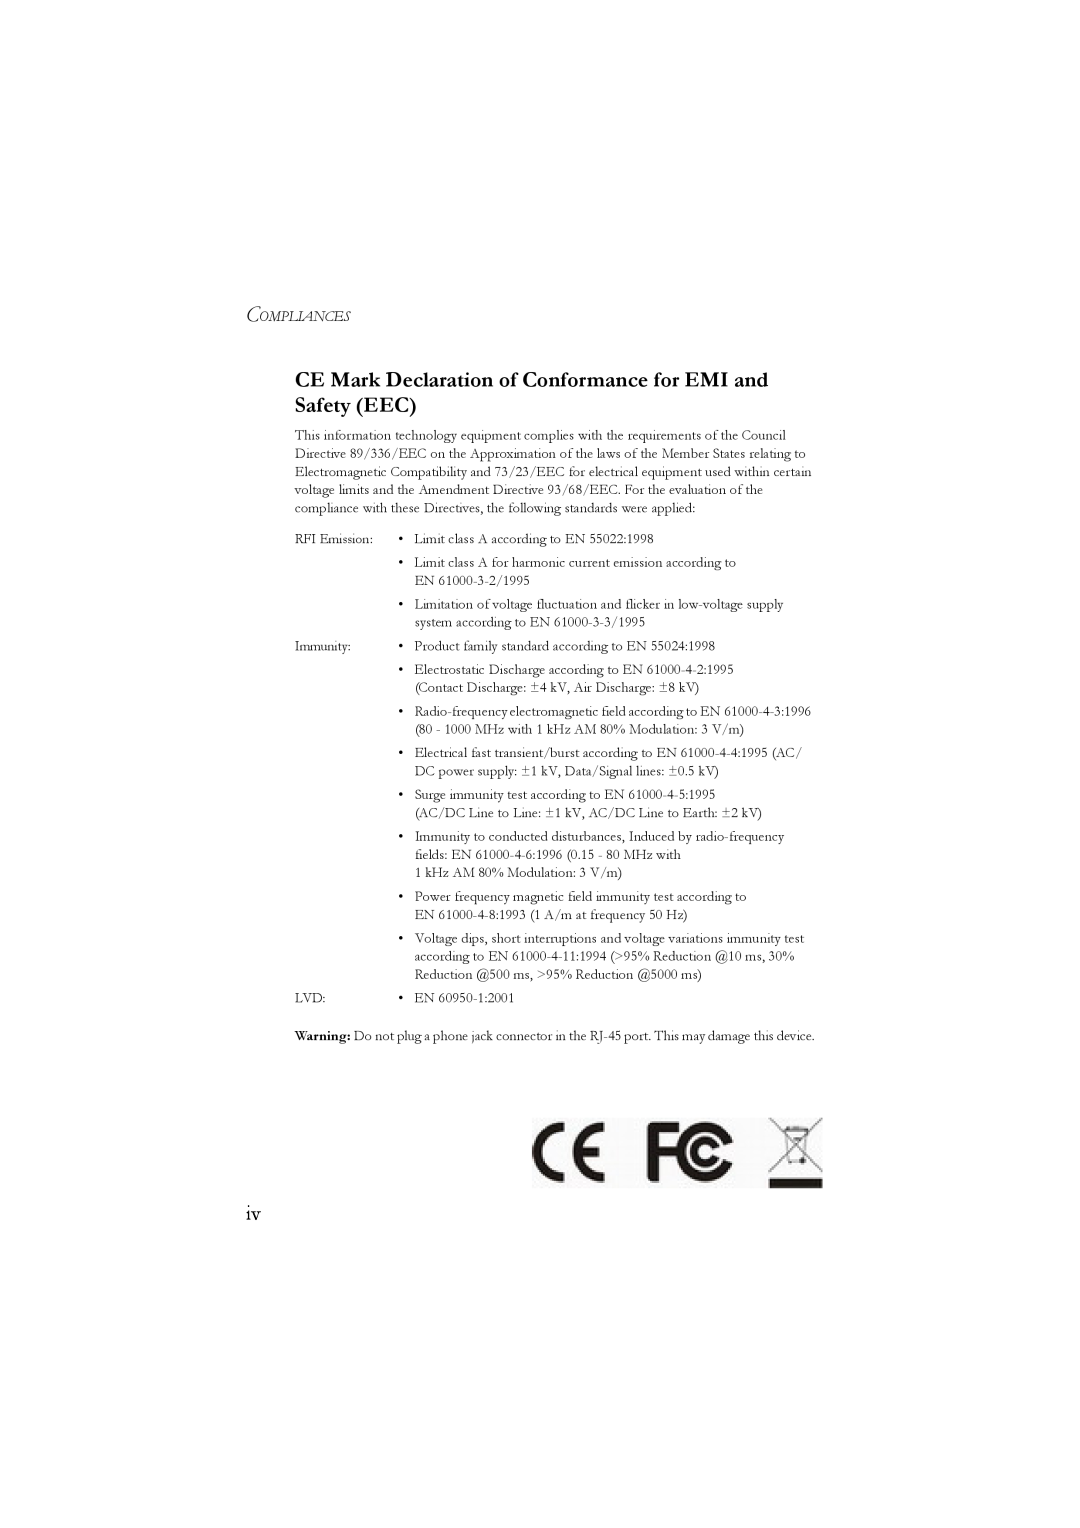 LevelOne GSW-2476 user manual CE Mark Declaration of Conformance for EMI and Safety EEC, Compliances 